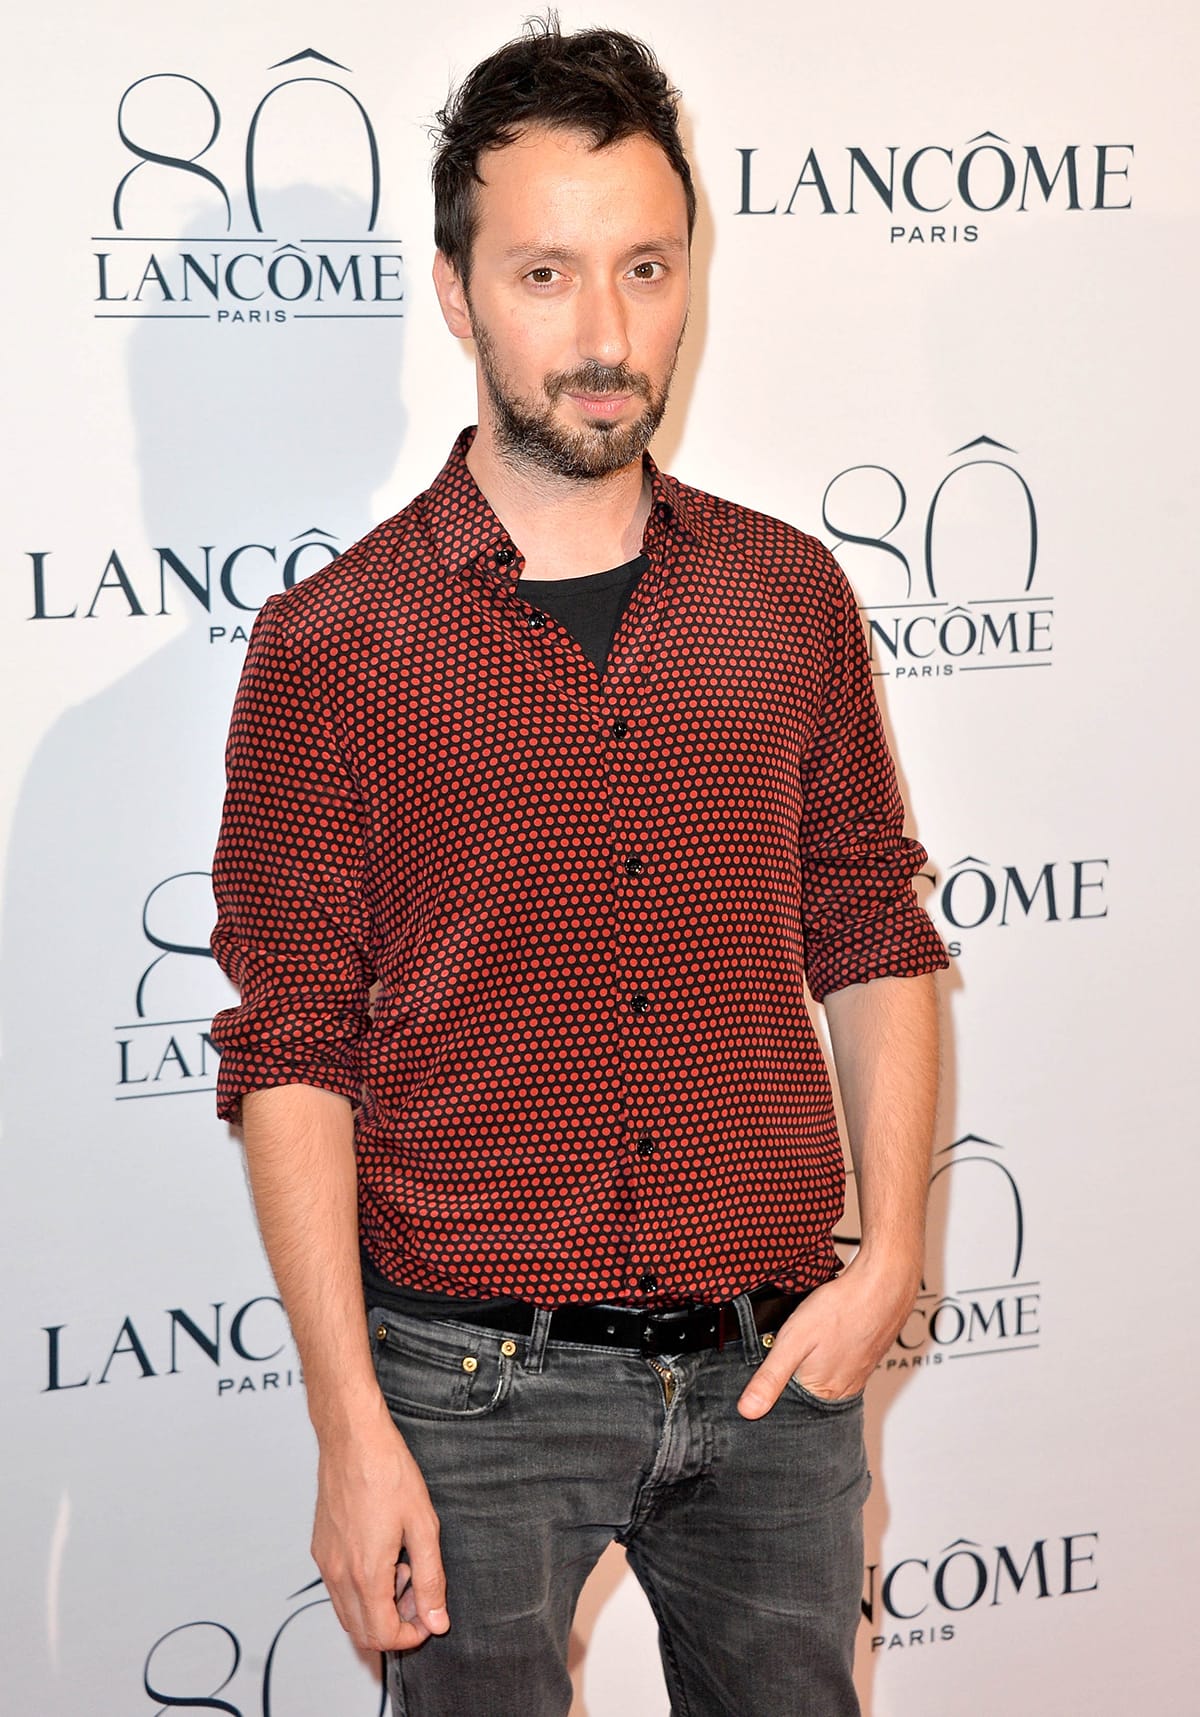 Anthony Vaccarello completed a year of law school before enrolling in the sculpture program of La Cambre and switching to a fashion course